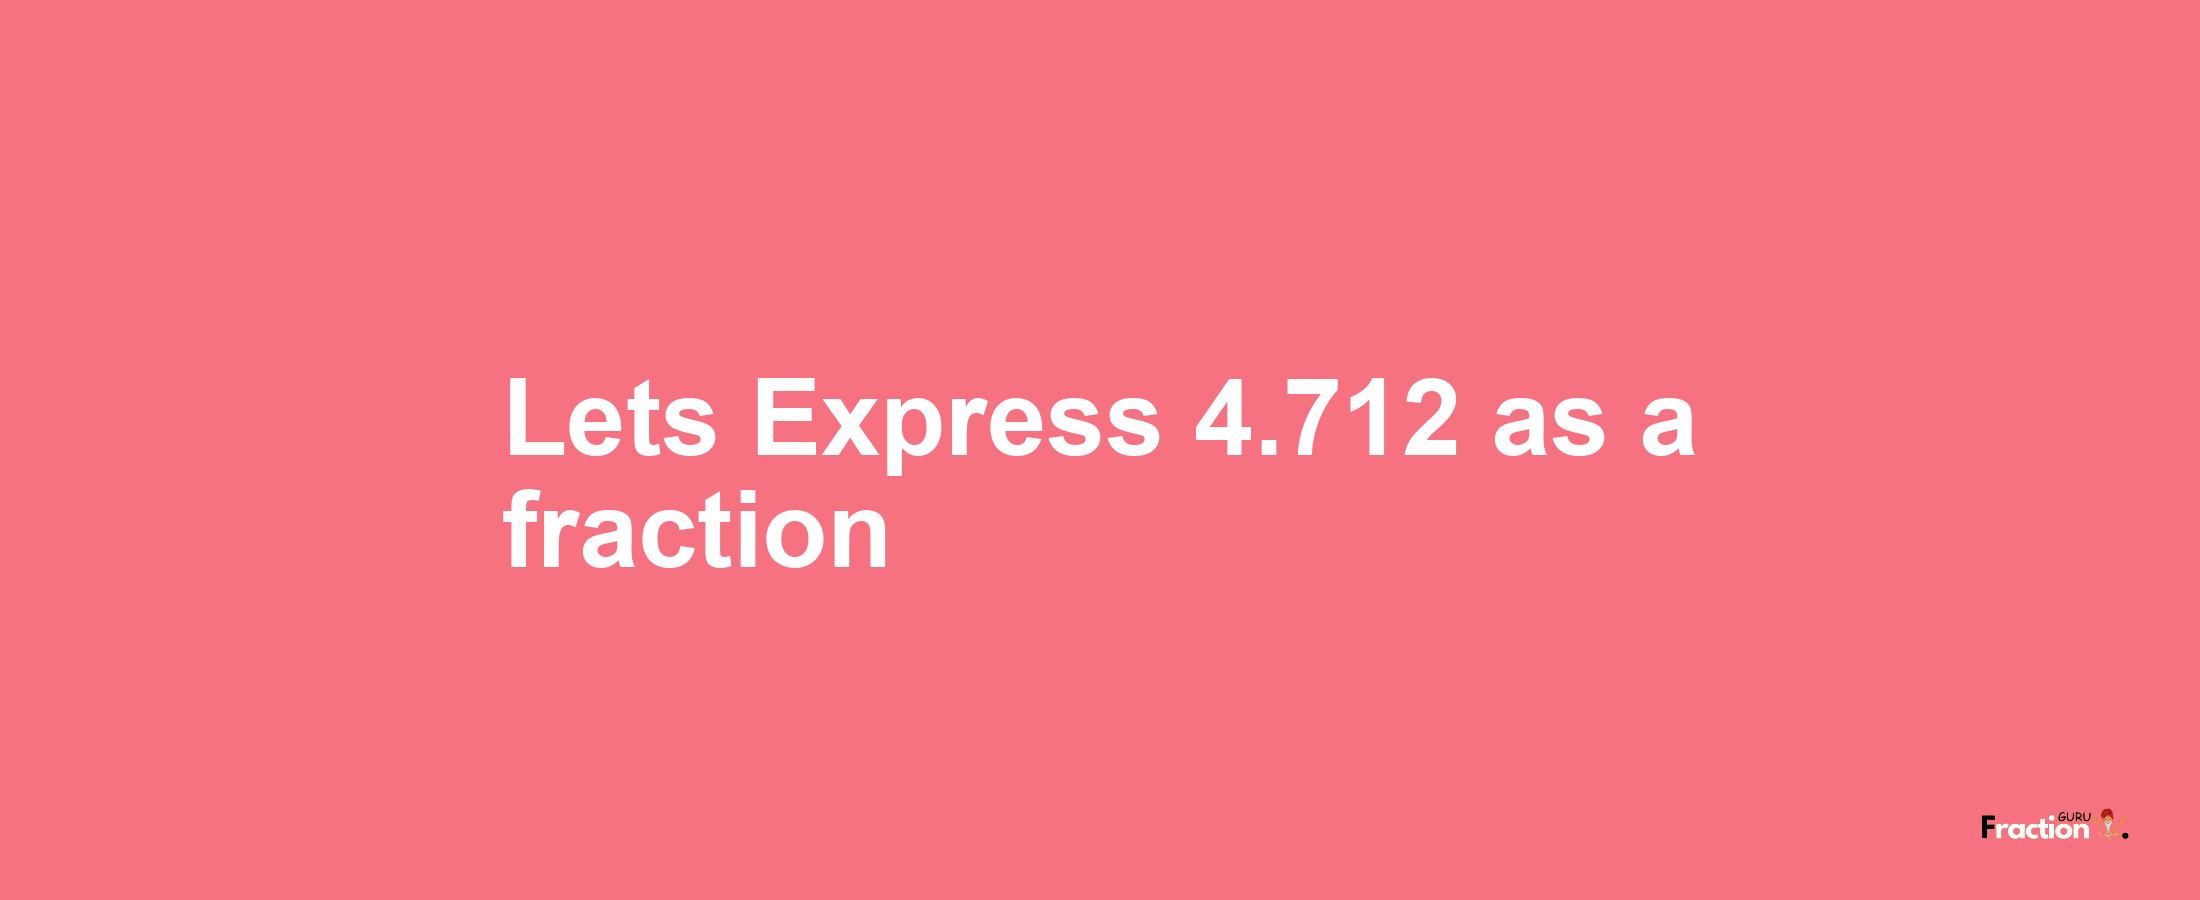 Lets Express 4.712 as afraction